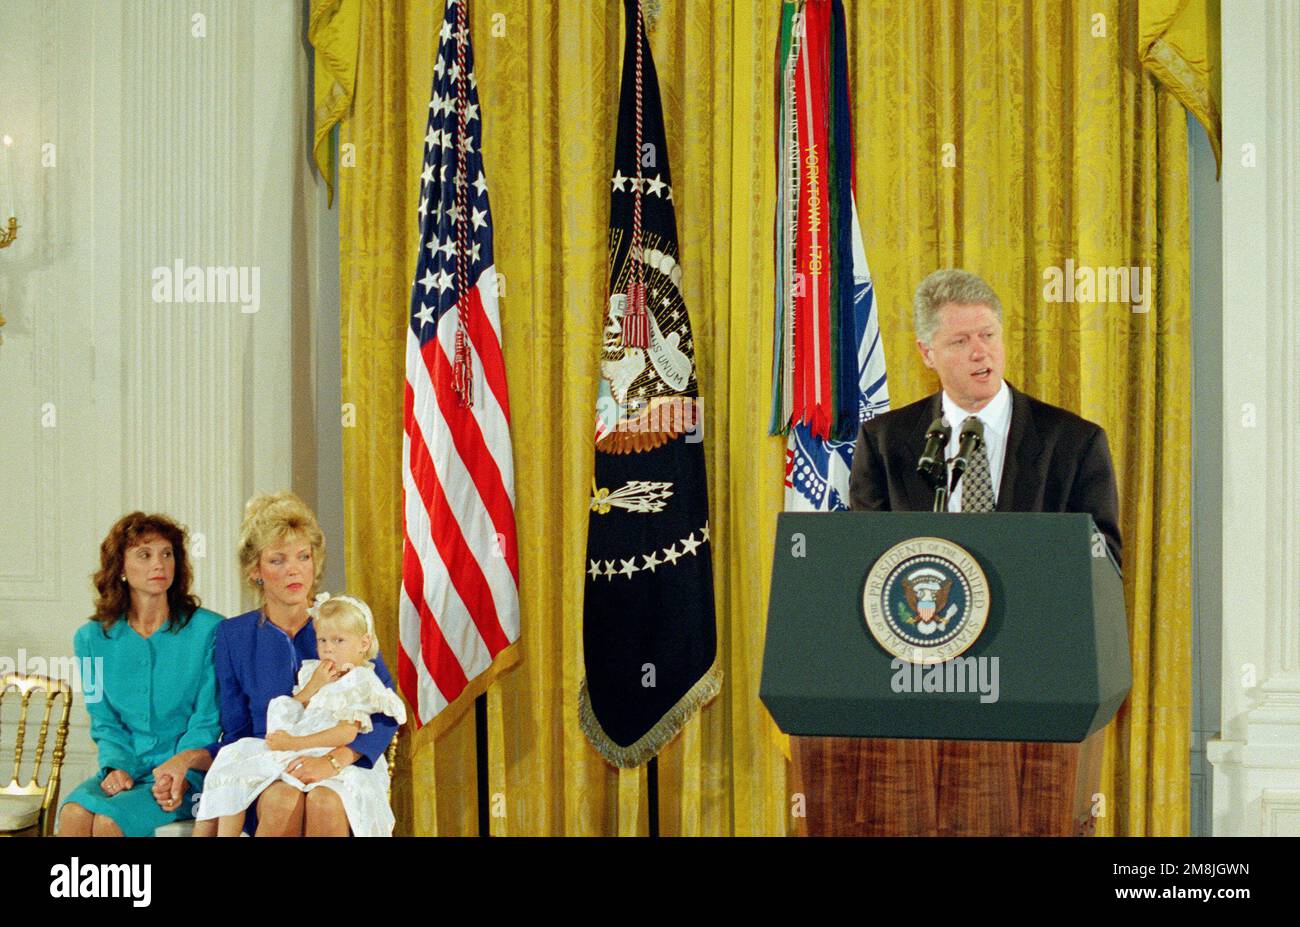 The President of the United States, William J. Clinton presented the nation's highest award for military valor The Medal of Honor (Posthumously) to the widows of Sergeant First Class Randall D. Shughart, Stephanie (left) and MASTER Sergeant Gary I. Gordon, Carmen, with 3-year old Brittany. The Sergeants were killed on 03 October 1993, while serving as Sniper Team Member and Leader, United States Army Special Operation Command with Task Force Ranger in Mogadishu, Somalia. They provided precision sniper fires from the lead helicopter during an assault on a building and at two helicopter crash si Stock Photo